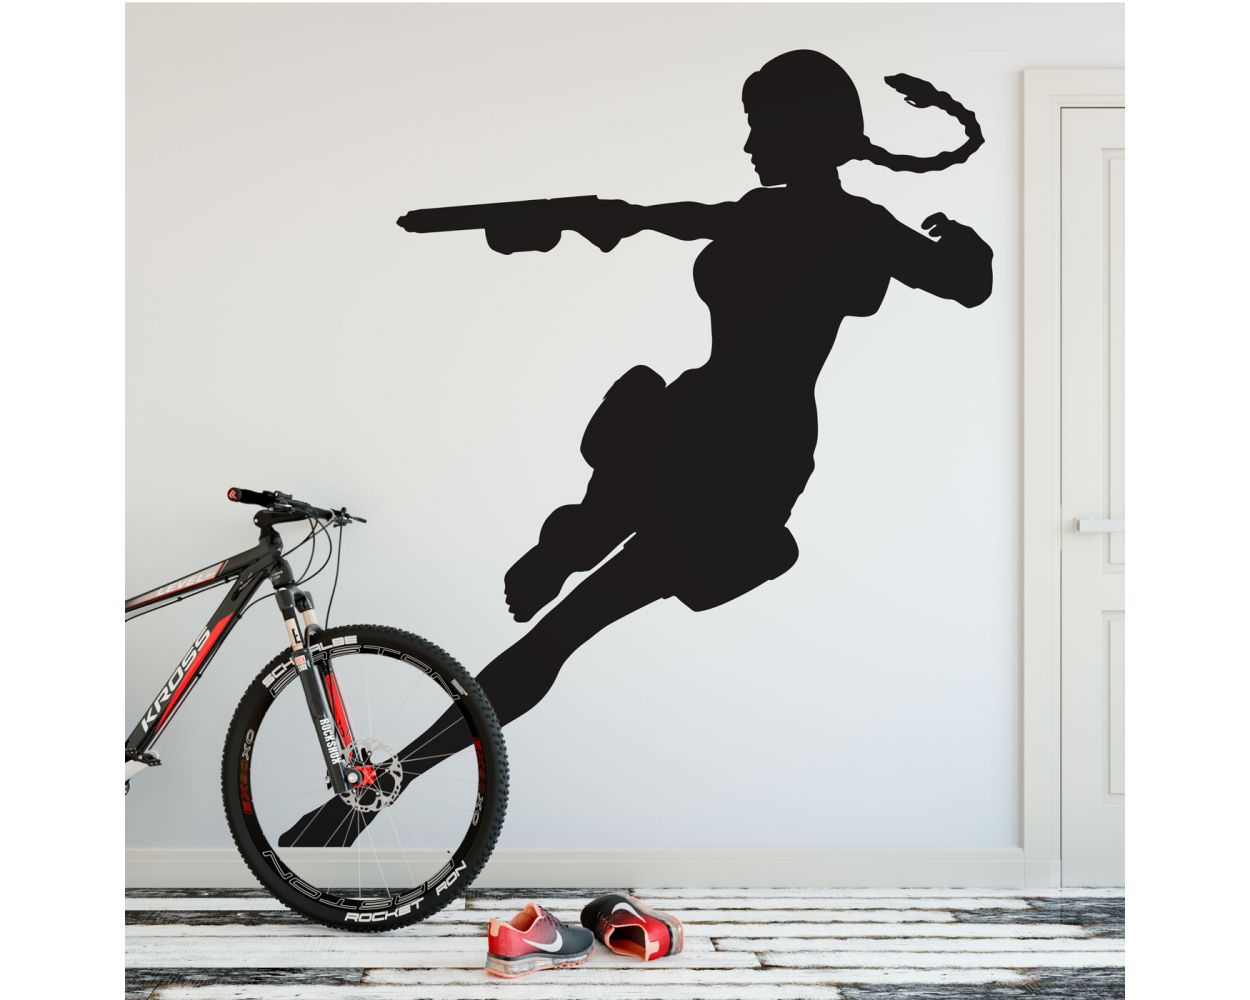 Tomb Raider Silhoutte Wall Decal for Gaming Room